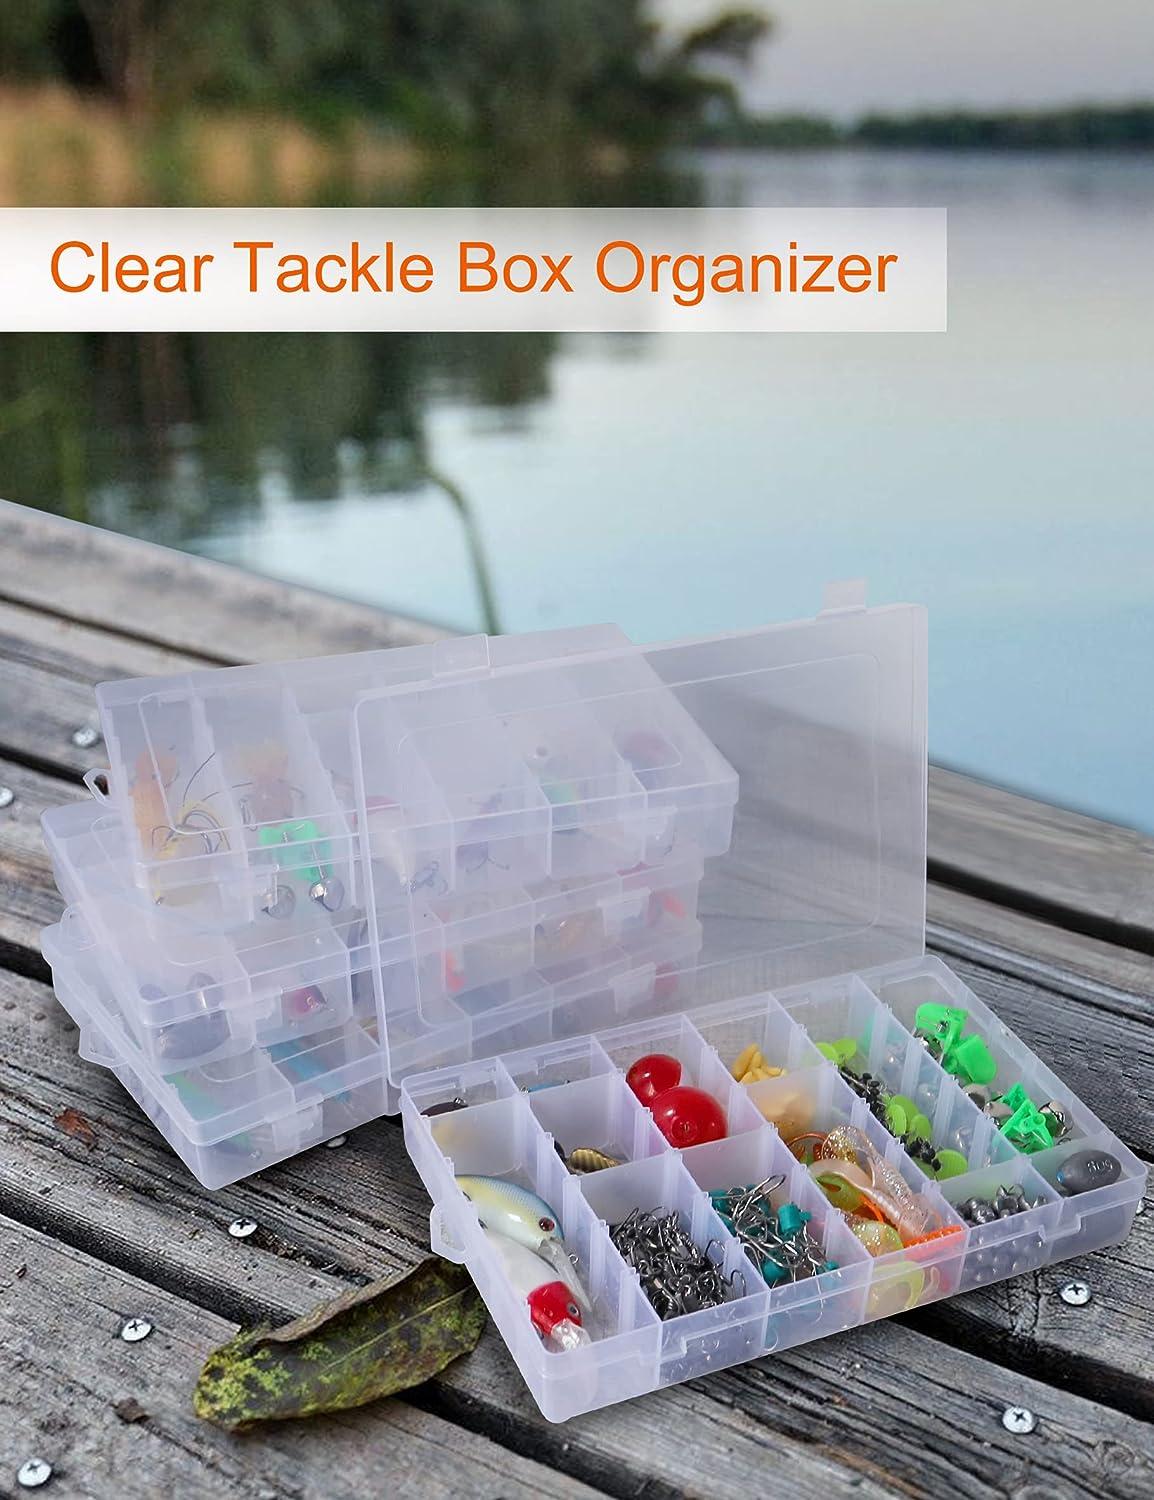 Avlcoaky Tackle Box Organizer Plastic Organizer Boxes Large 18 Grids  Compartment box with Dividers Clear Containers Jewelry Beads Storage